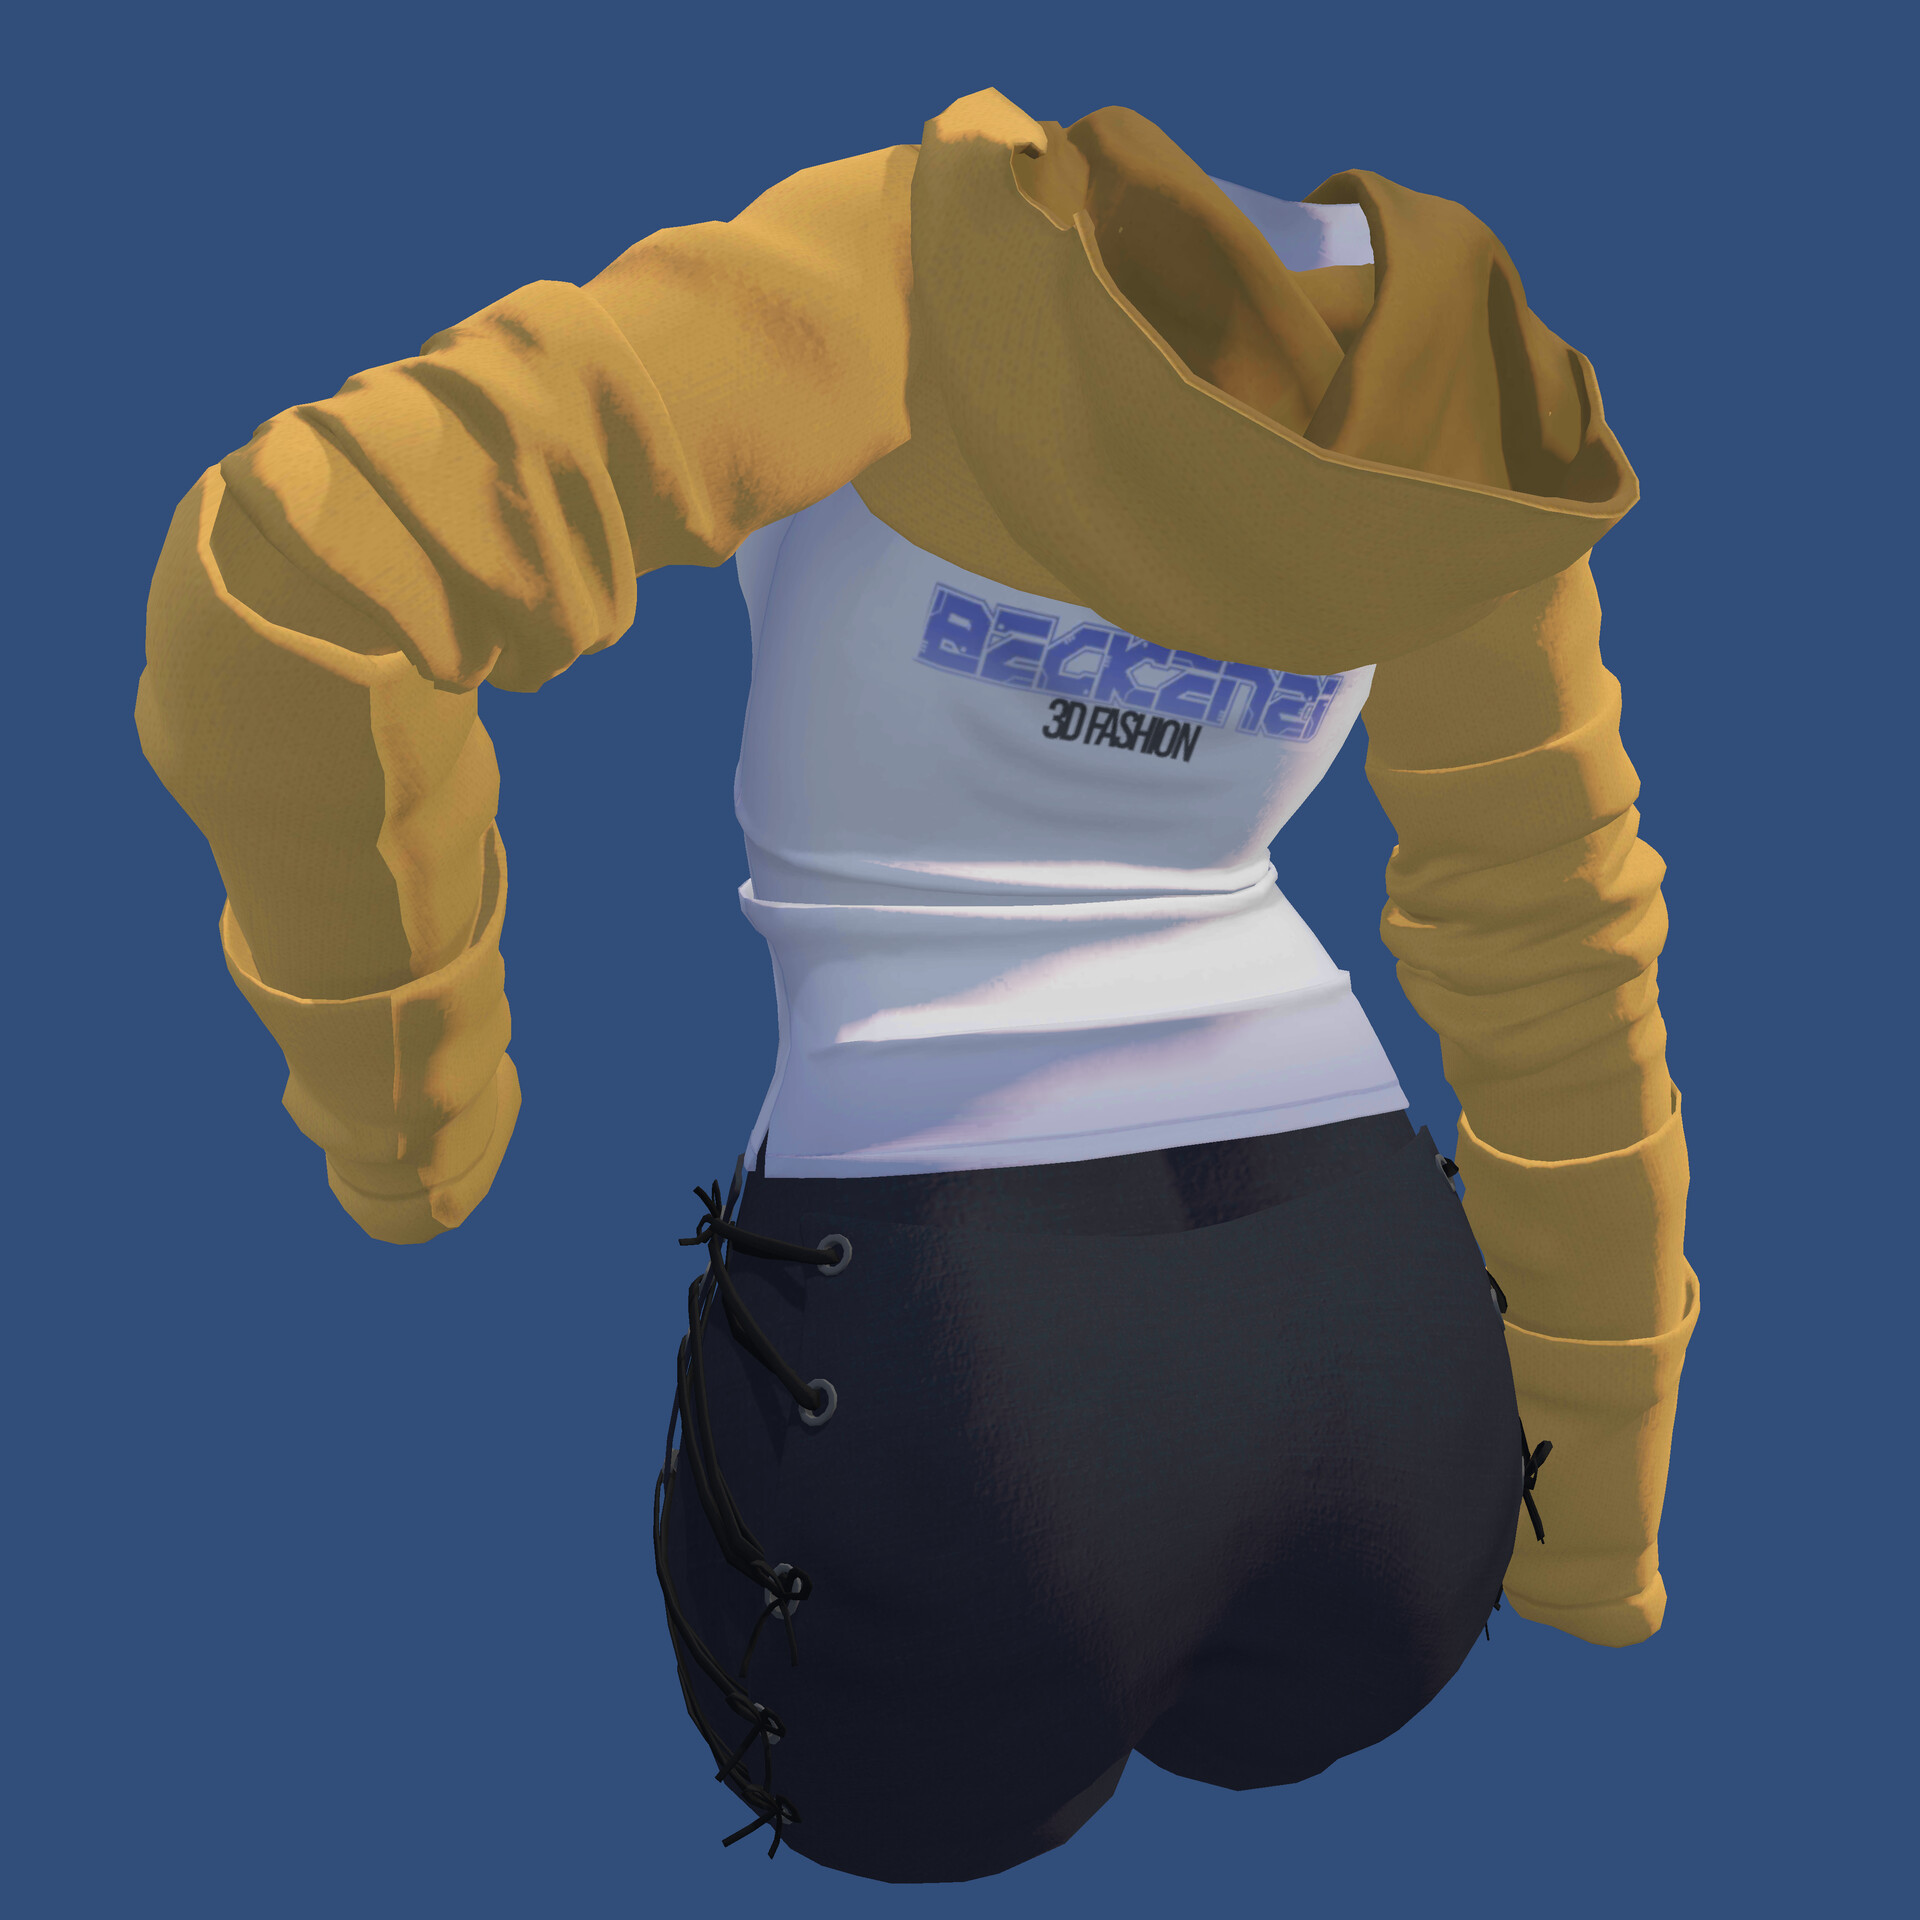 jersey hoodie outfit